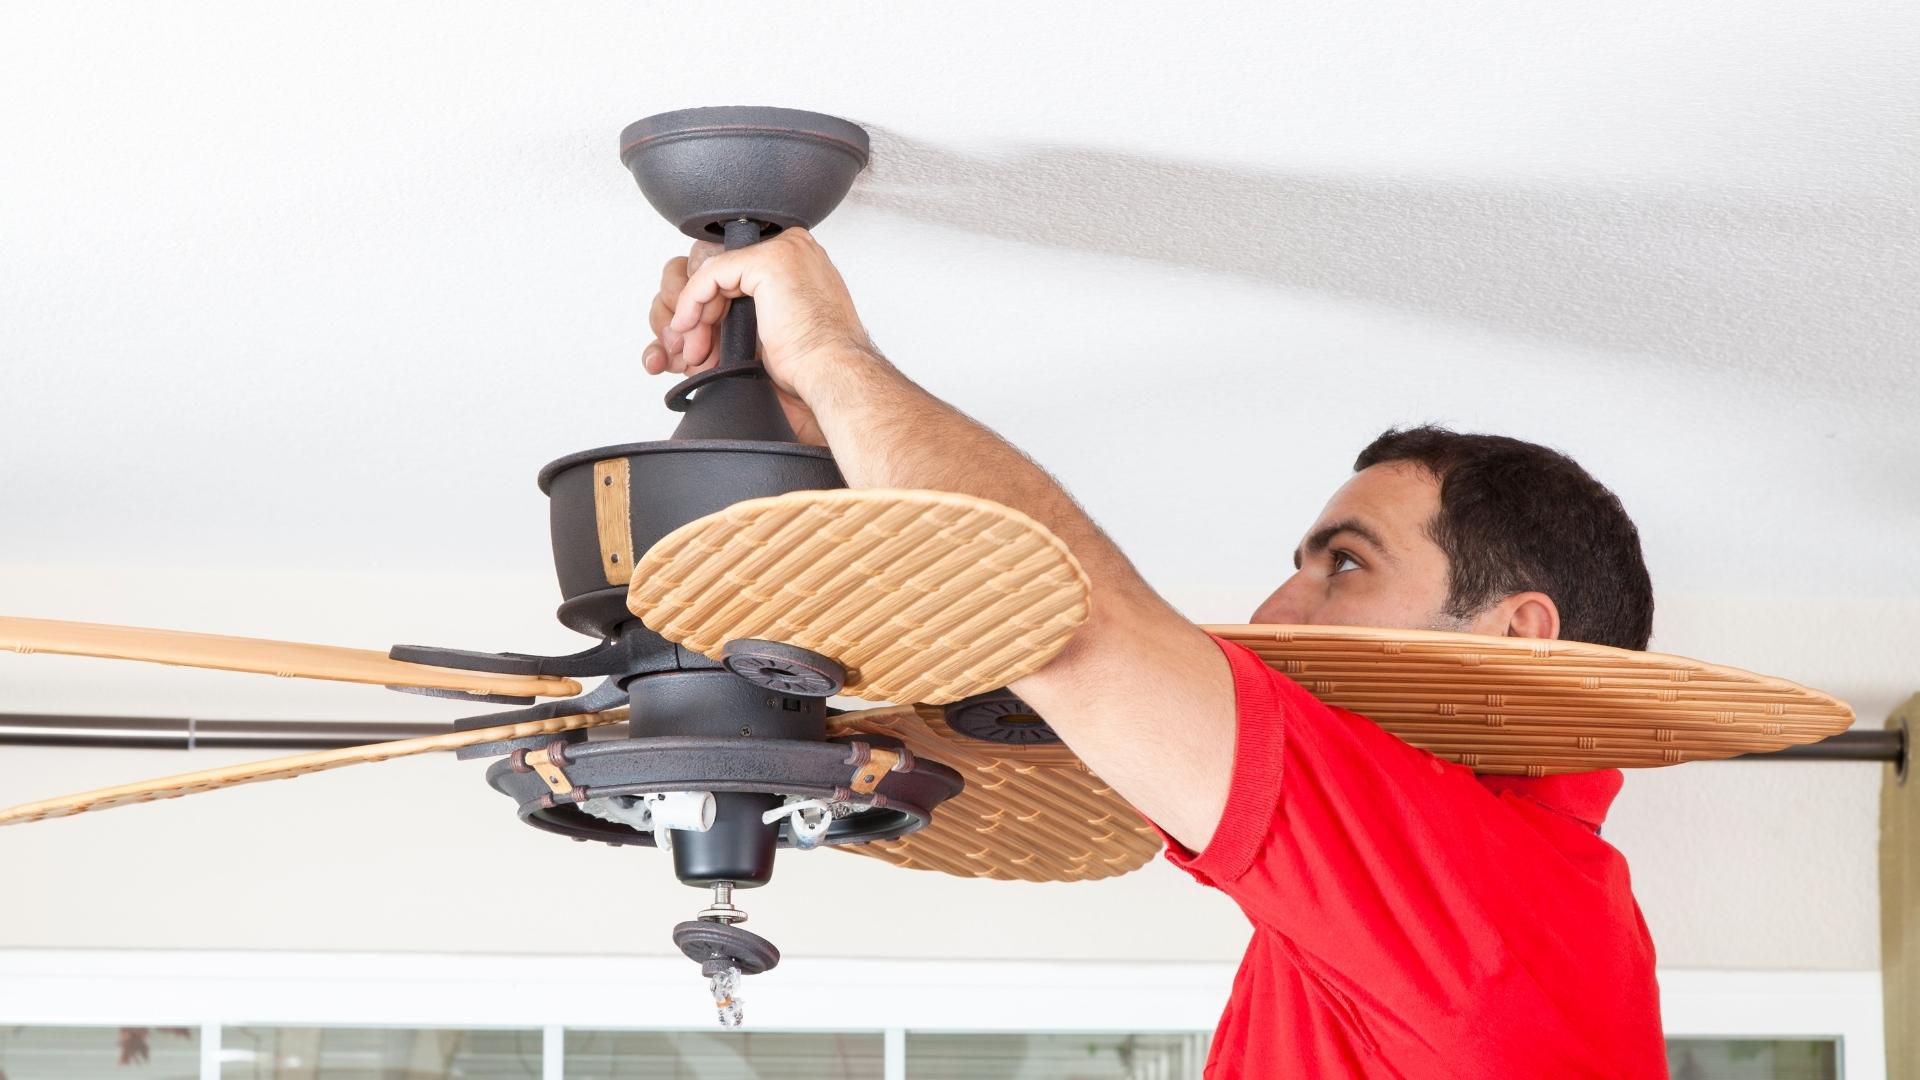 Do You Need an Electrician to Install/Repair Your Ceiling Fan?